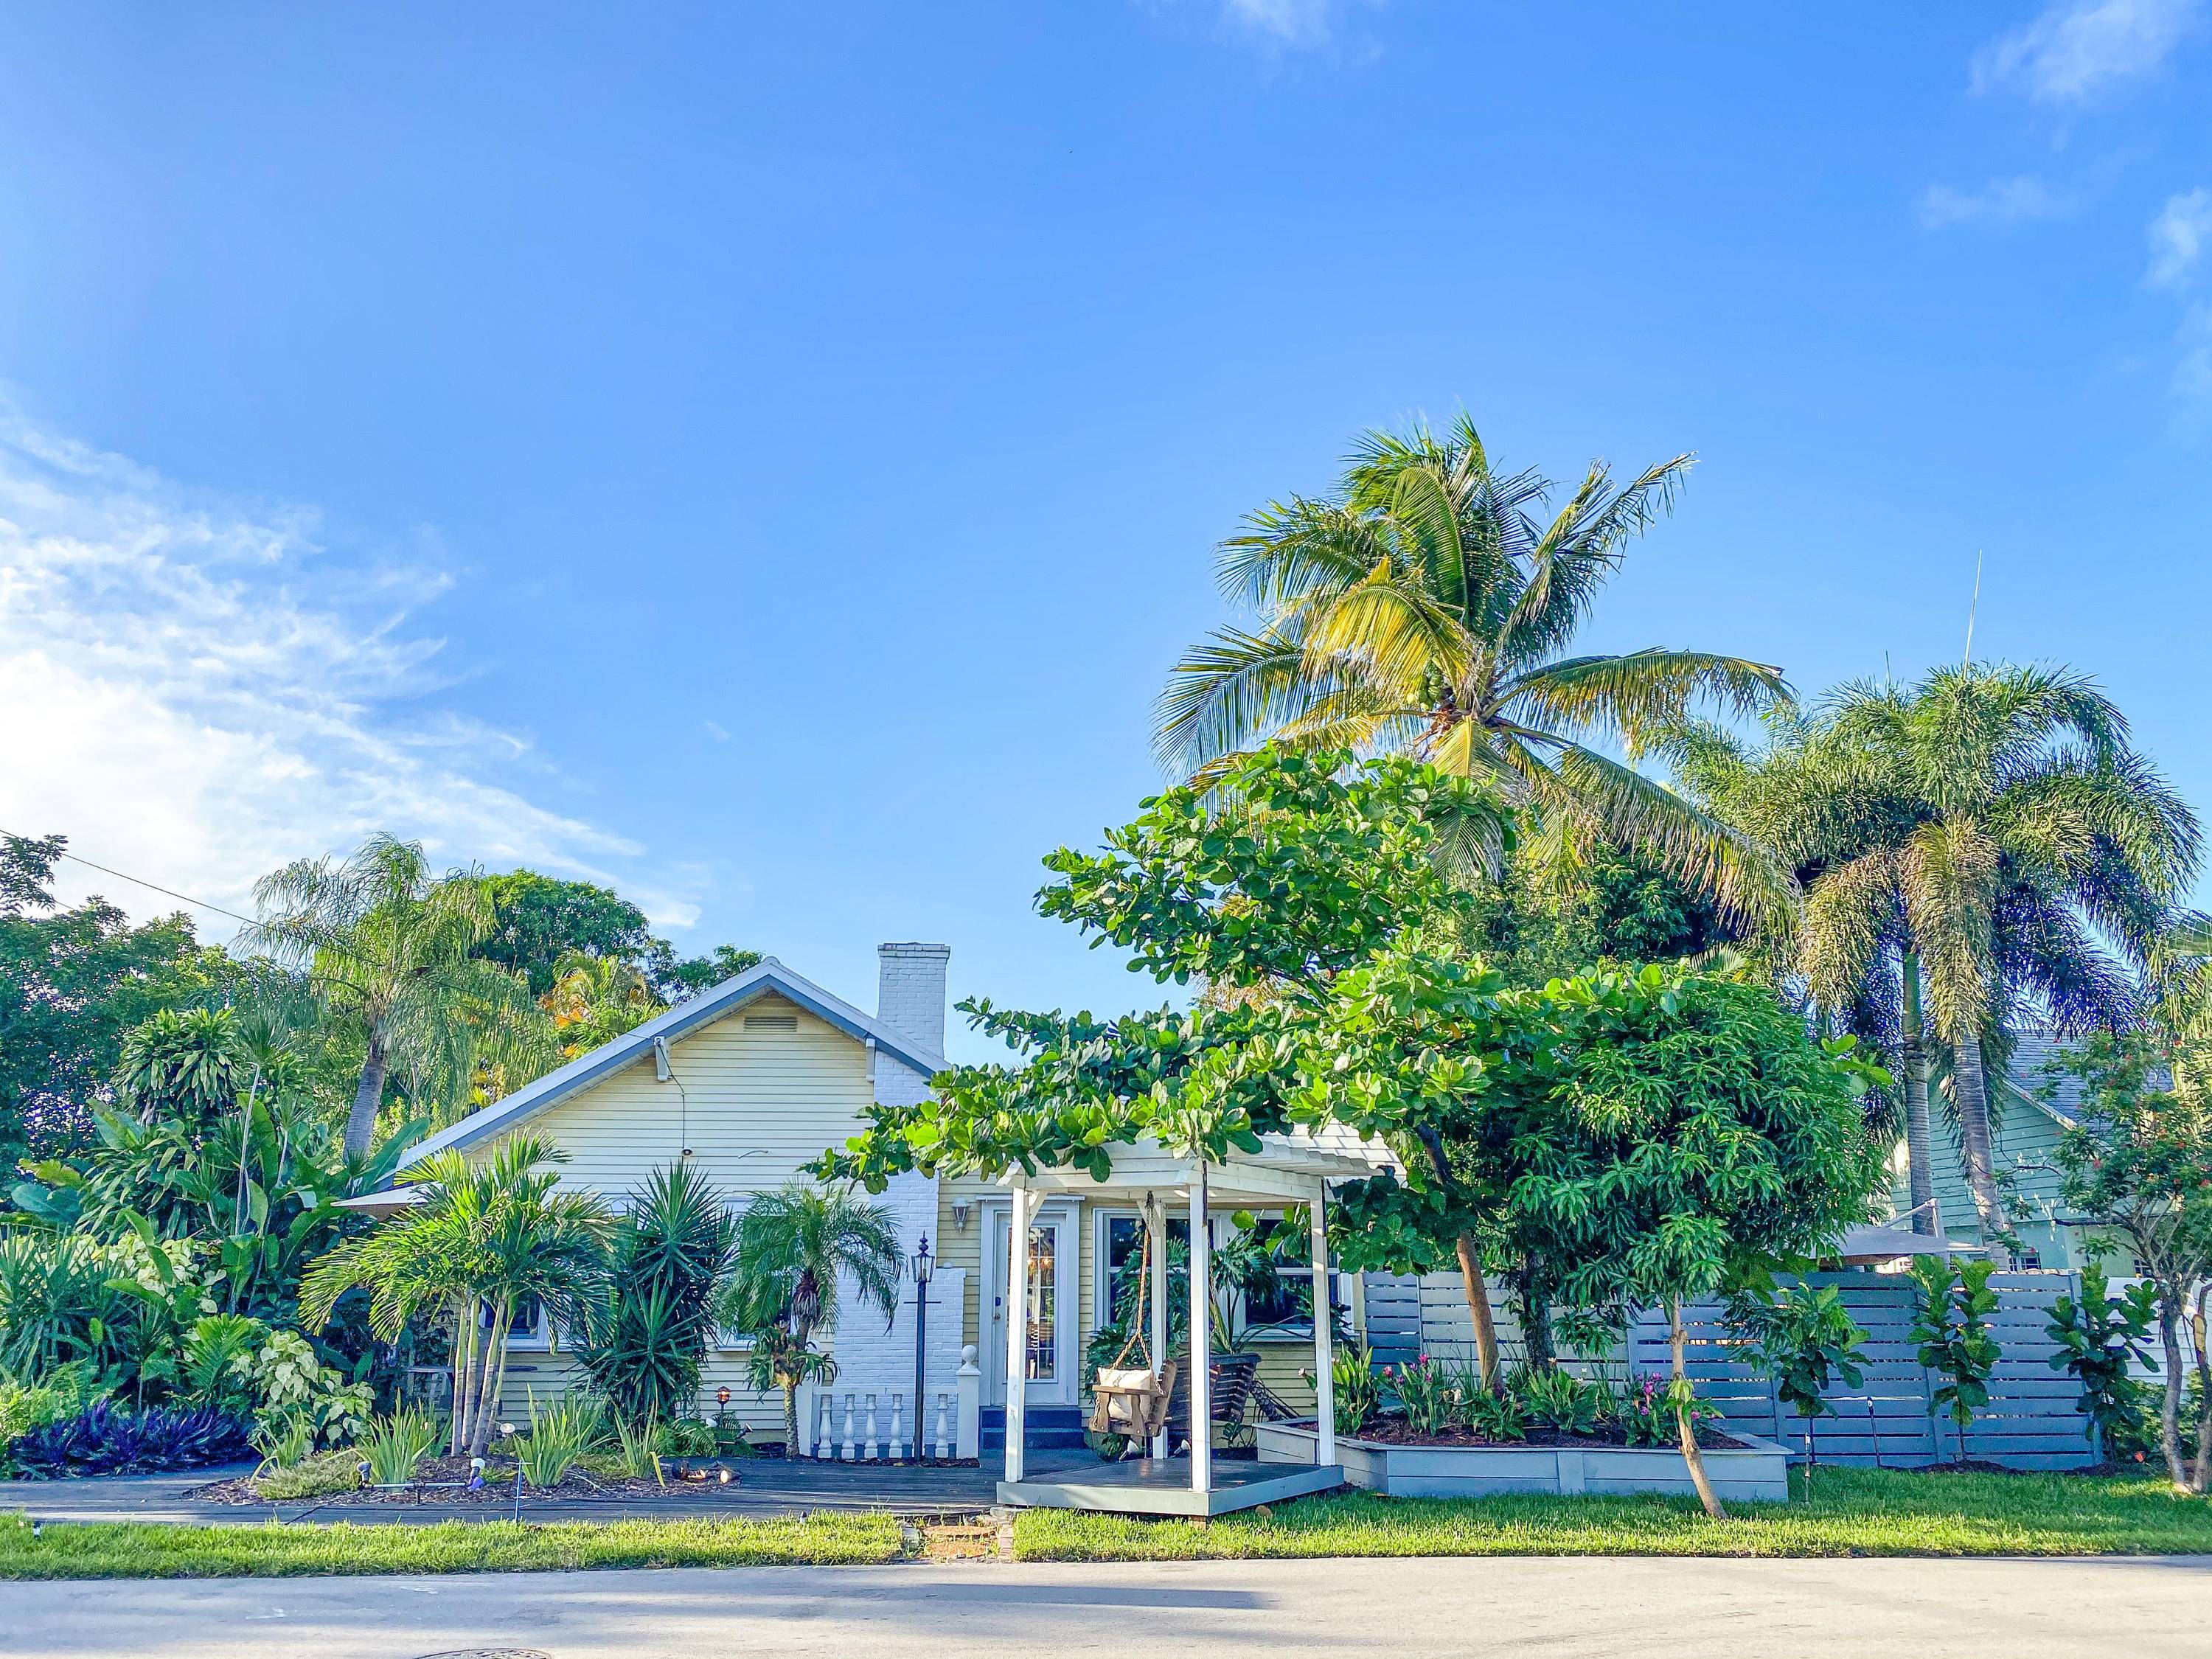 Experience the Majestic Tranquility Victoria Park Offers In This Beautifully Designed, Historically Designated Key West Style Bungalow.